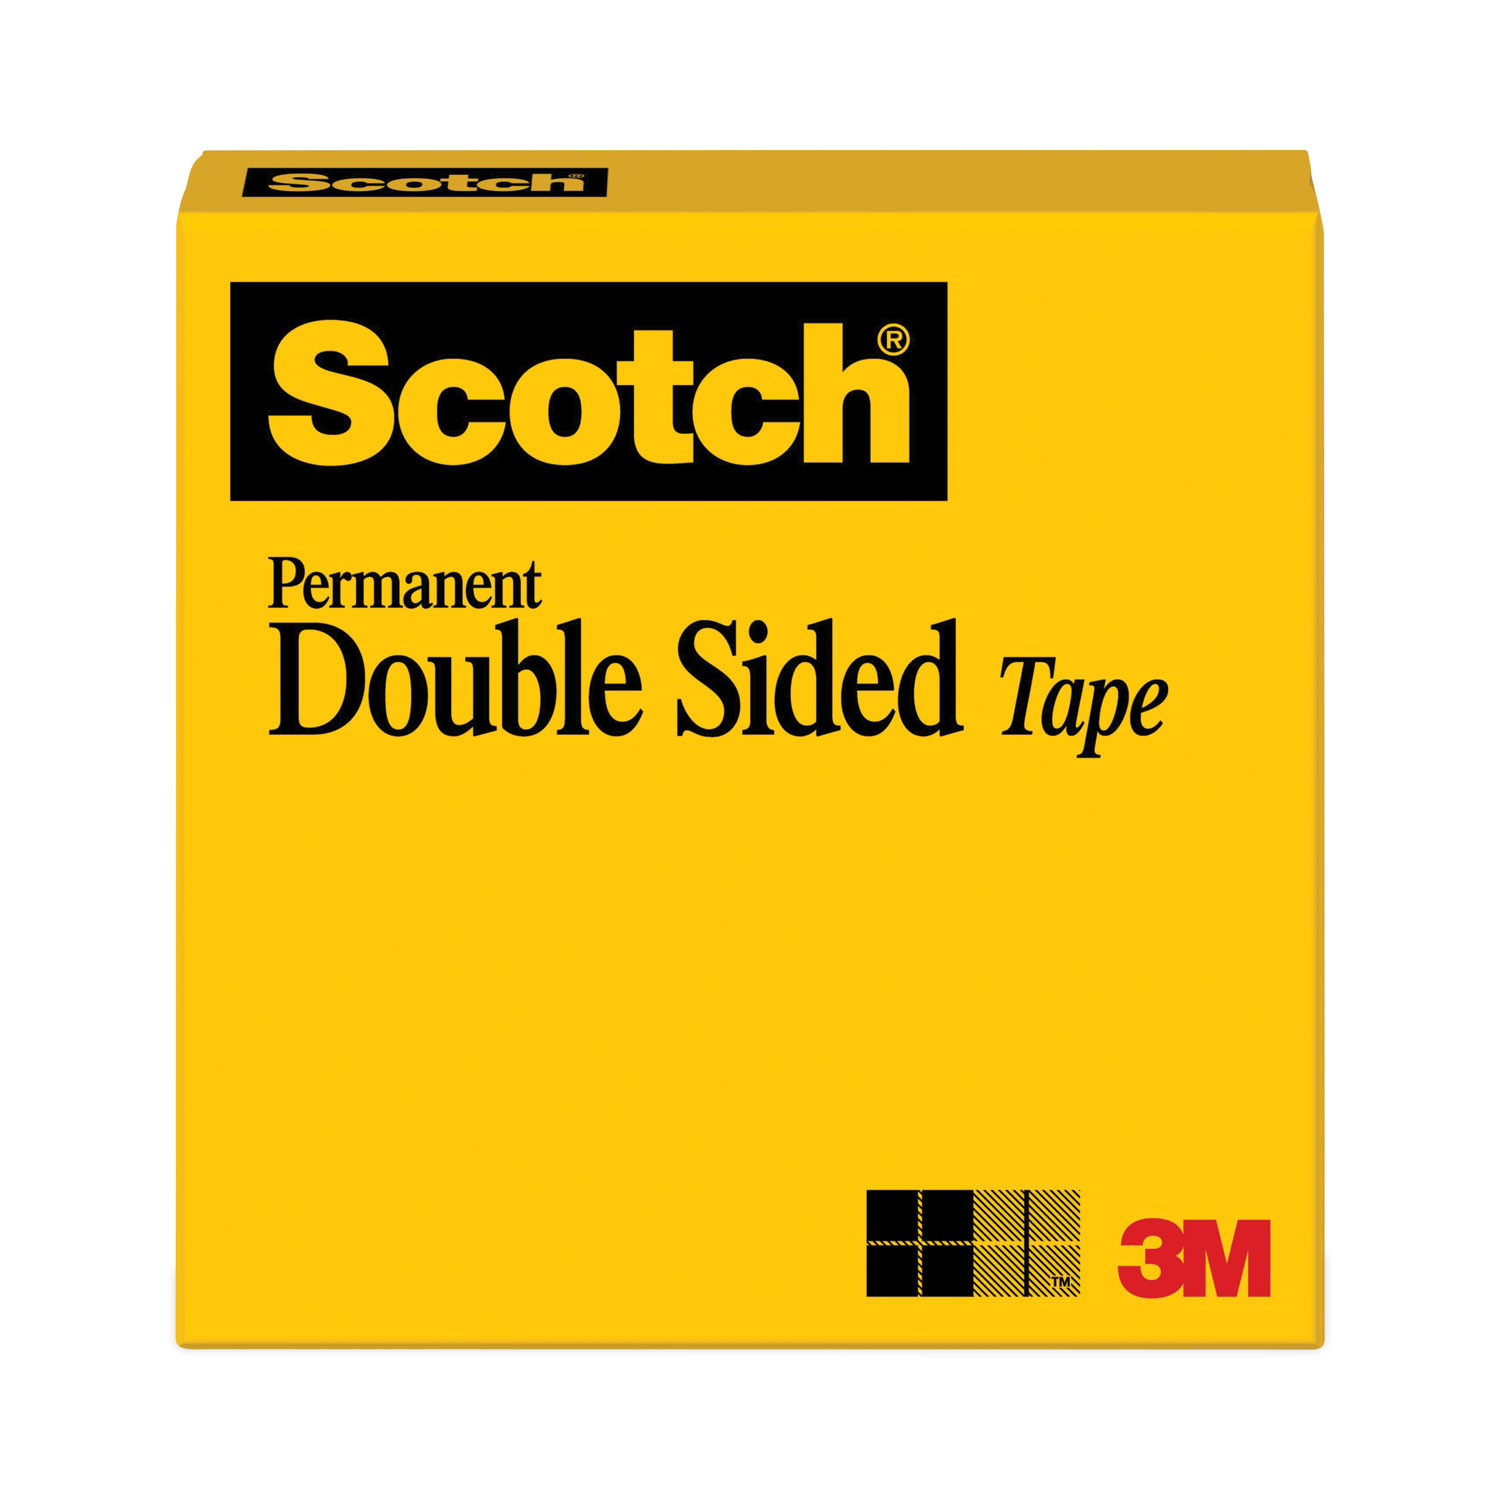 Double Sided Adhesive Tape, 1 Wide X 36yds Long